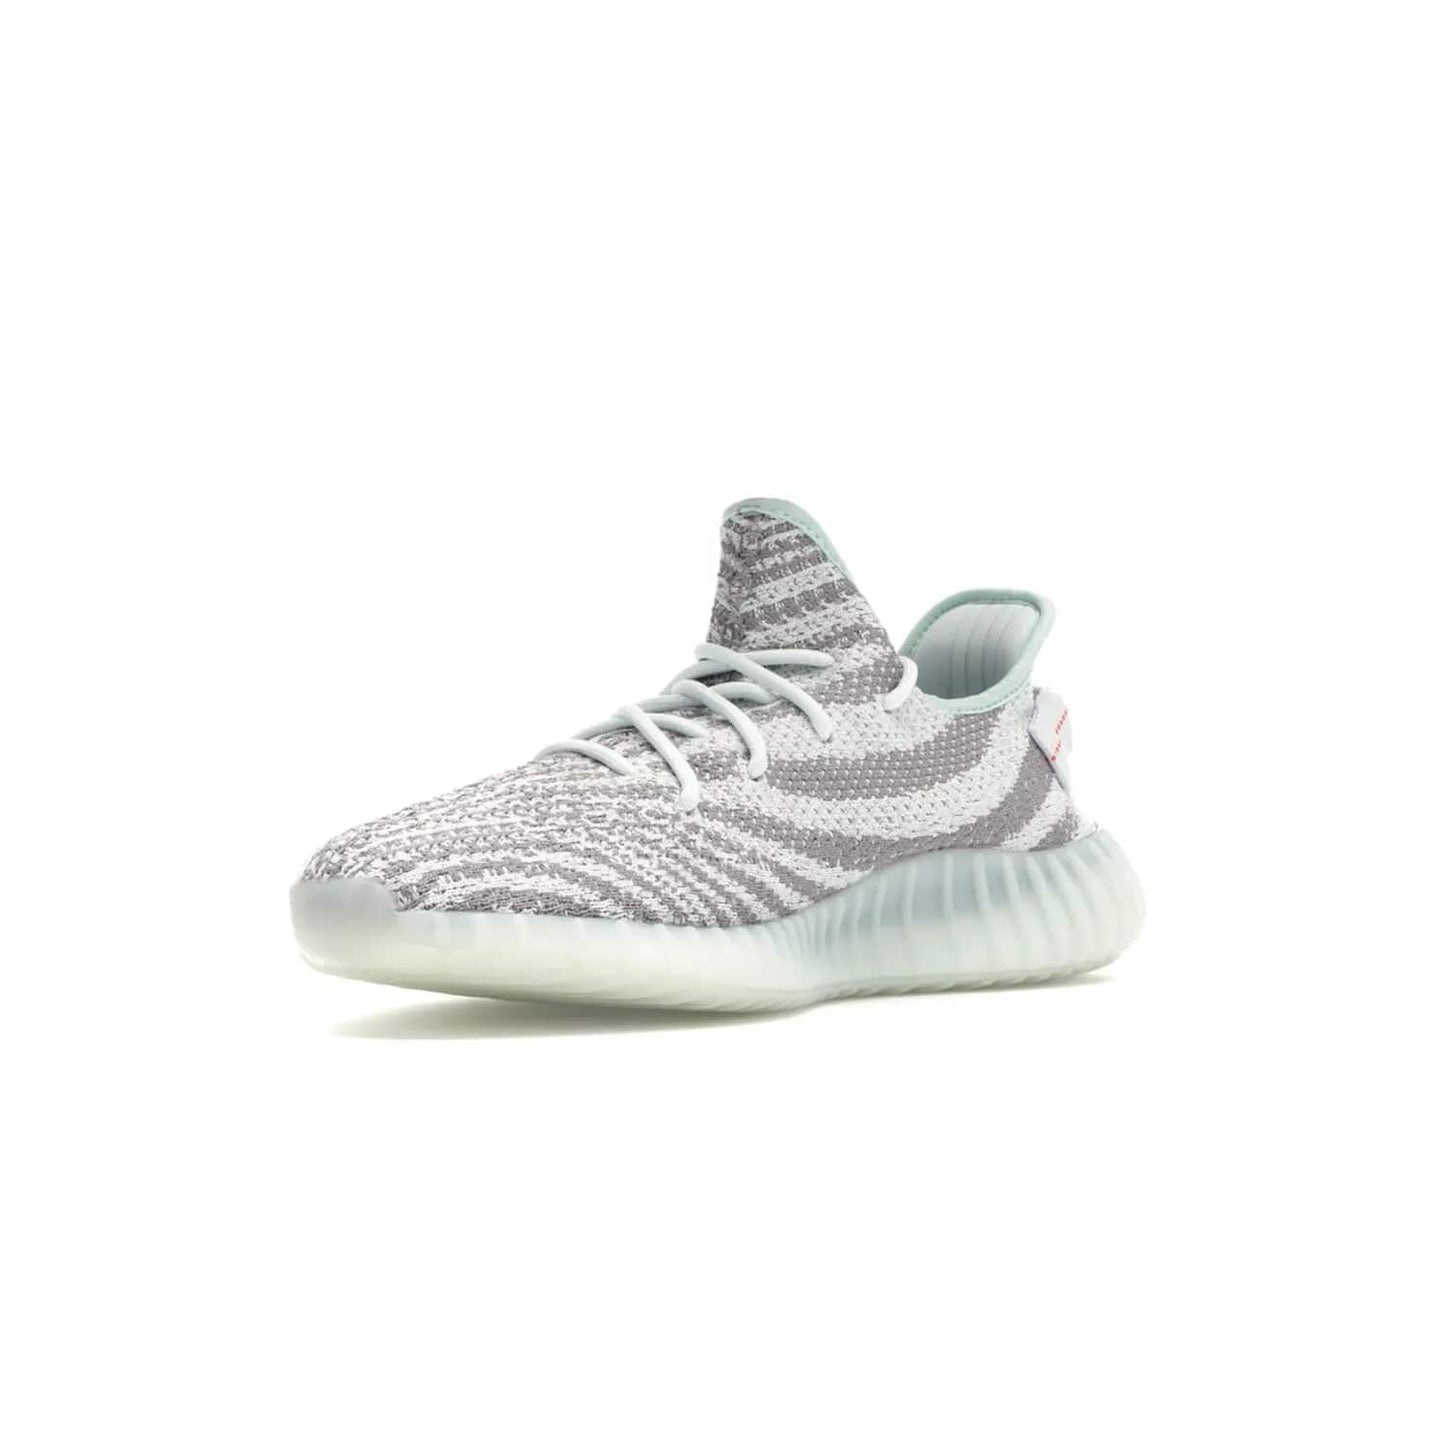 adidas Yeezy Boost 350 V2 Blue Tint - Image 15 - Only at www.BallersClubKickz.com - The adidas Yeezy Boost 350 V2 Blue Tint merges fashion and functionality with its Primeknit upper and Boost sole. Released in December 2017, this luxurious sneaker is perfect for making a stylish statement.